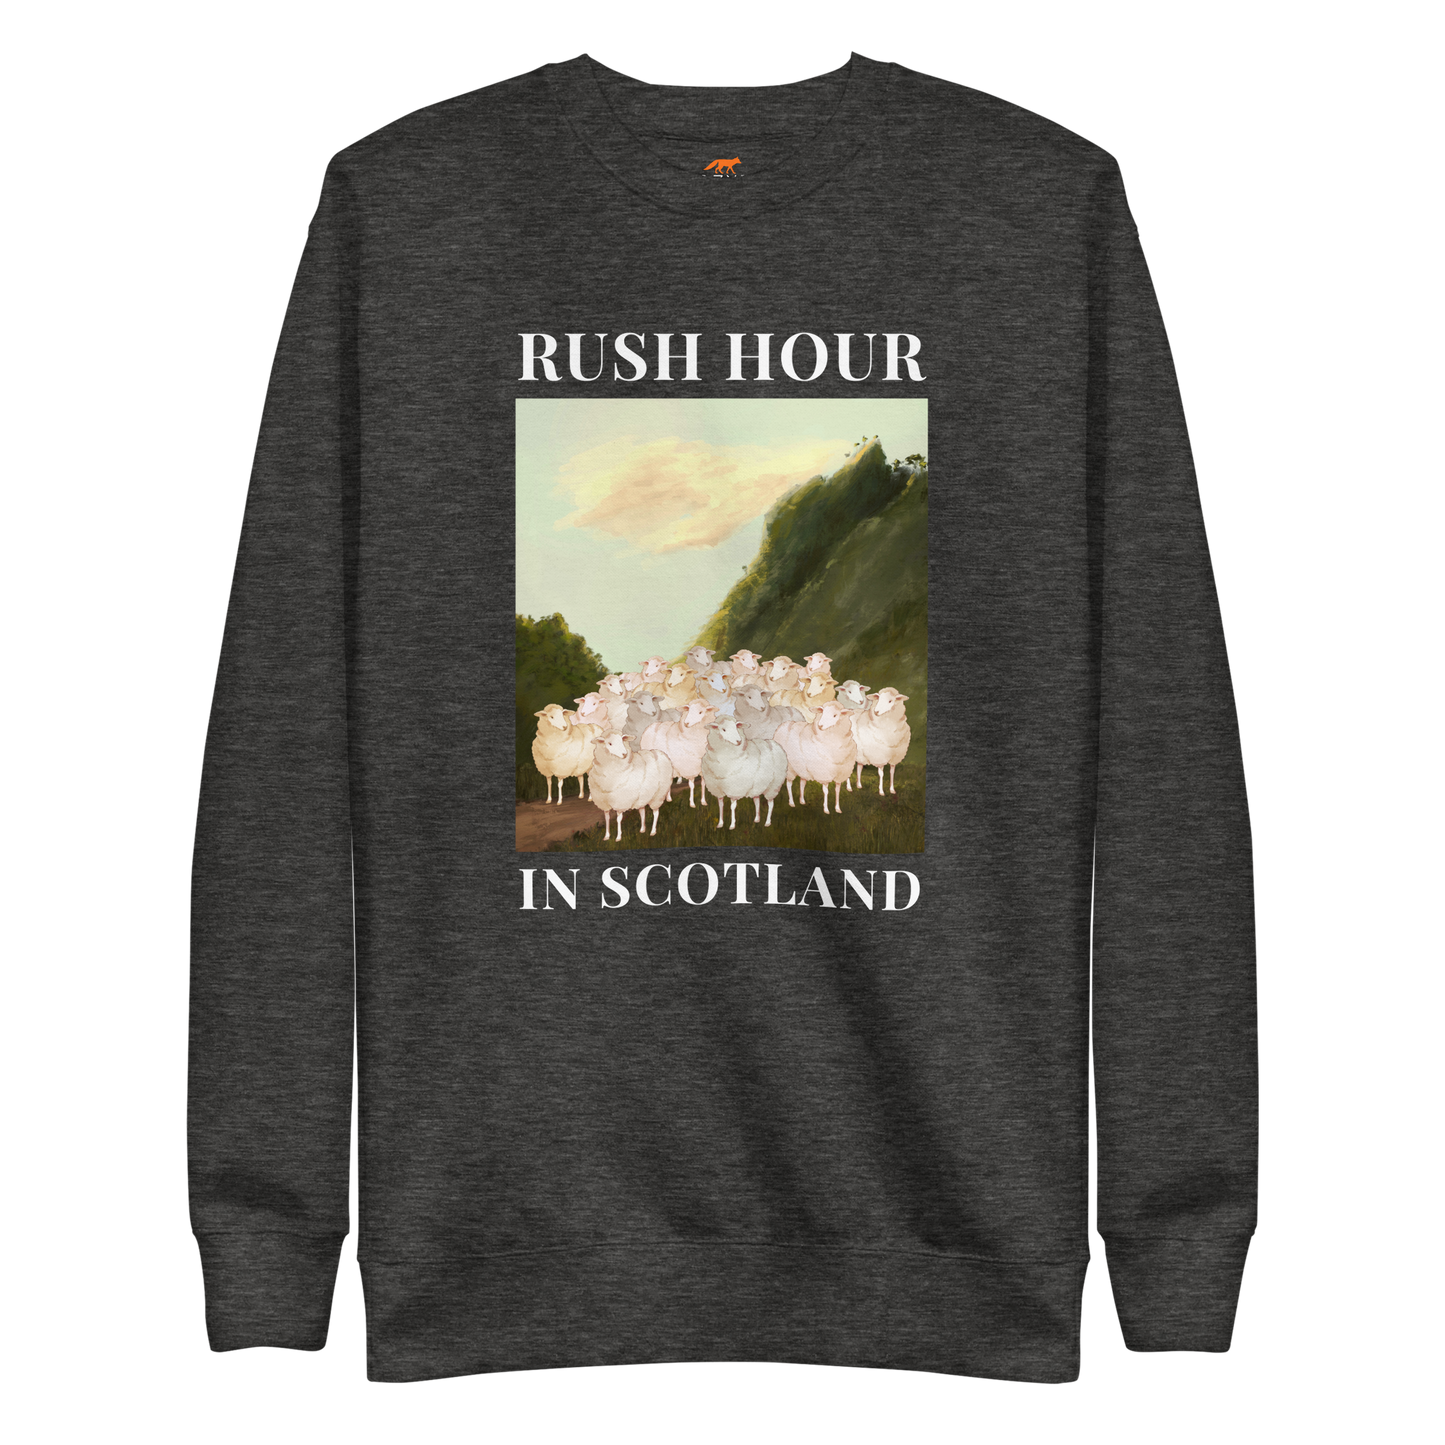 Charcoal Heather Premium Sheep Sweatshirt featuring a comical Rush Hour In Scotland graphic on the chest - Artsy/Funny Graphic Sheep Sweatshirts - Boozy Fox